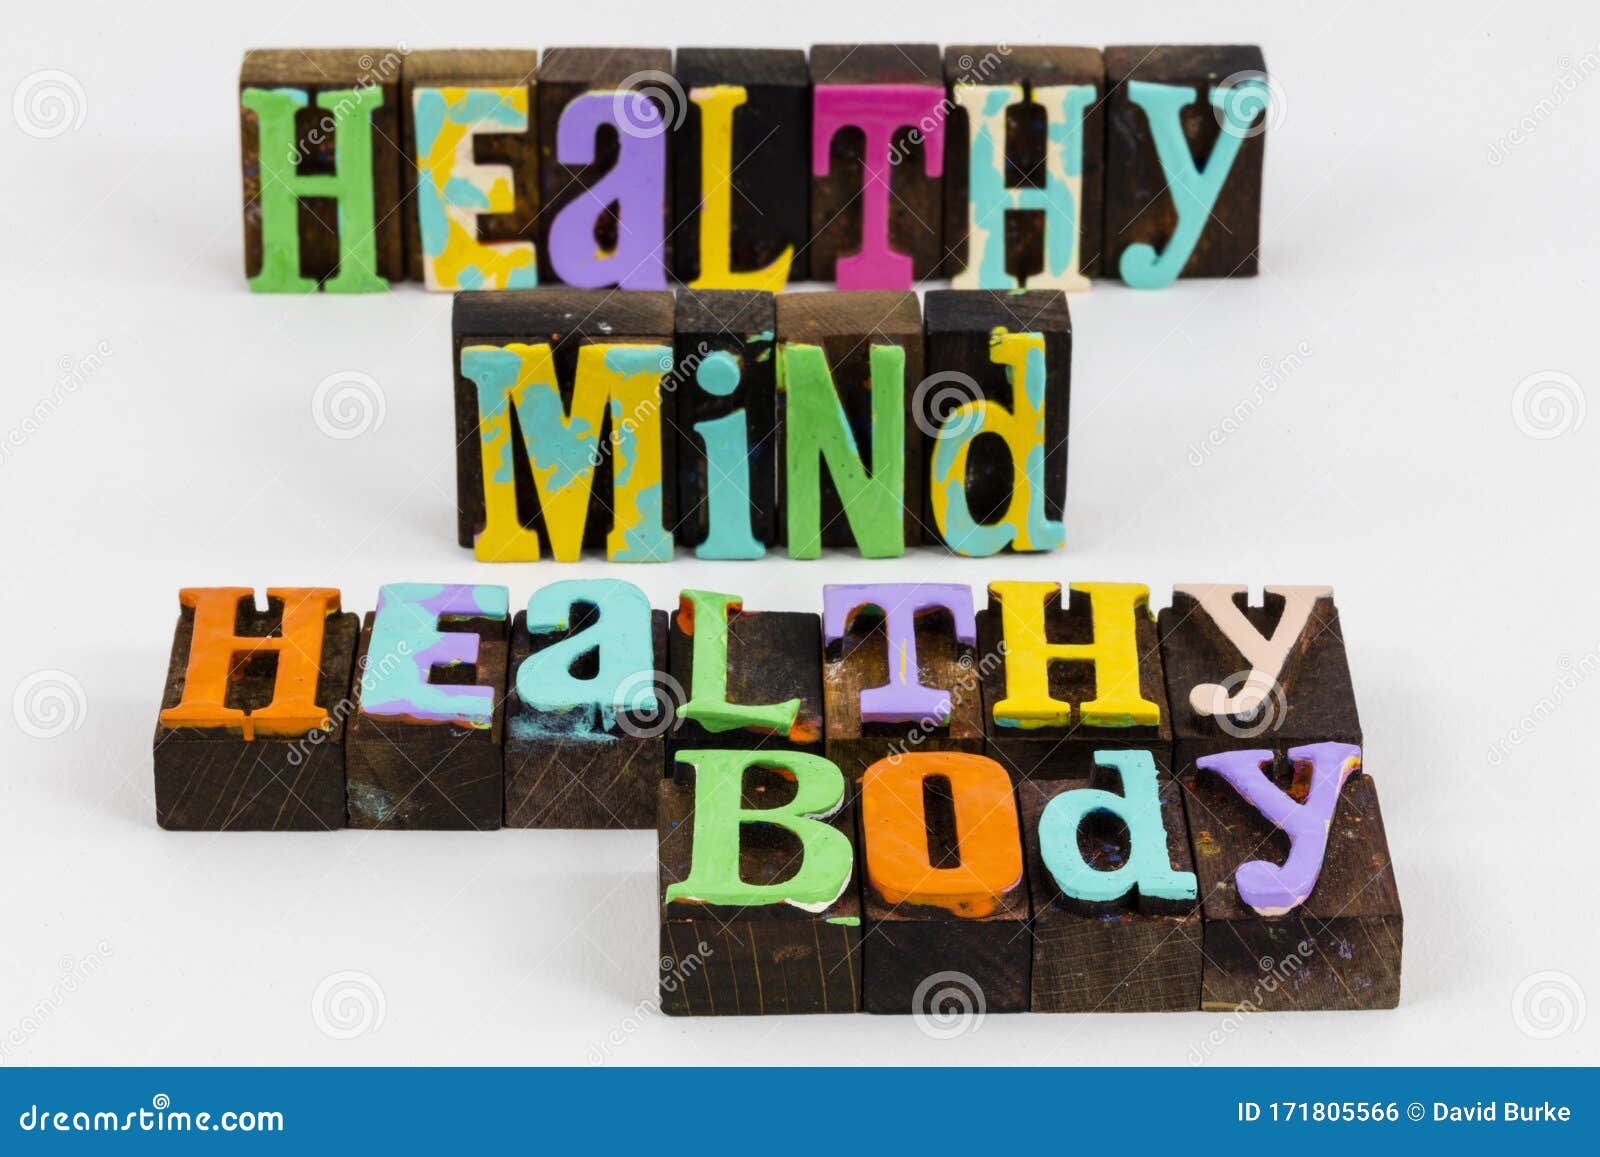 healthy mind body health active wellness mental physical activity